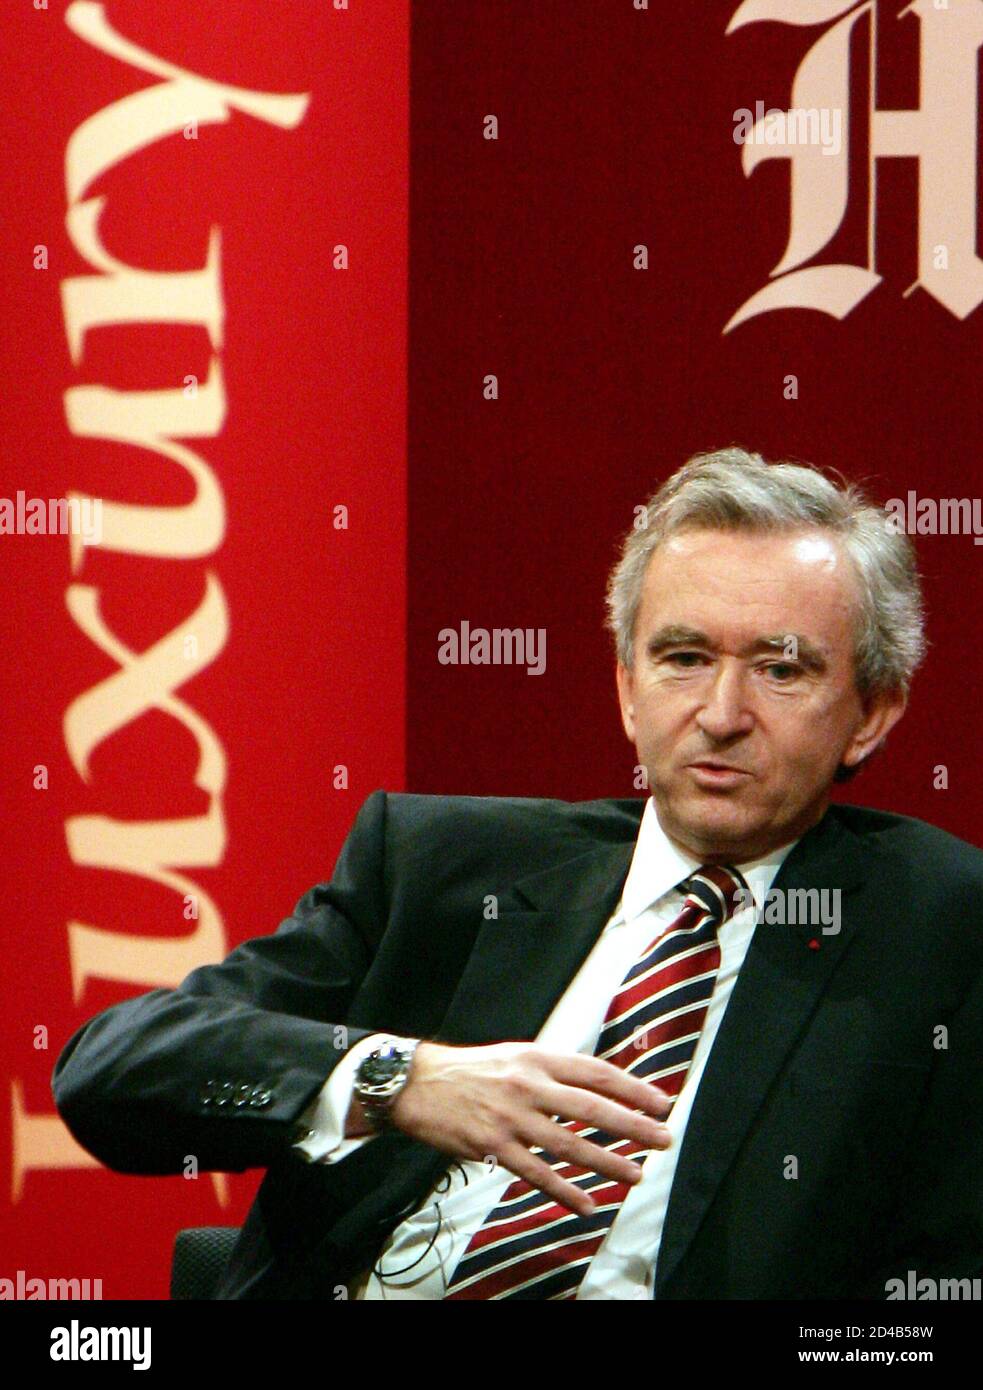 Bernard Arnault, chairman of LVMH Moet Hennessy Louis Vuitton, speaks at the 'Luxury 2004: the Lure of Asia' conference in Hong Kong December 1, 2004. Luxury brands powerhouse LVMH delivered a cautionary note on Wednesday about expecting quick and easy profits from fast-developing China, saying it could take up to a generation for sales to match other key regions. 'It takes time to build a brand. If we go too fast it will be a disaster,' said Bernard Arnault on the sidelines of the luxury goods conference. Stock Photo